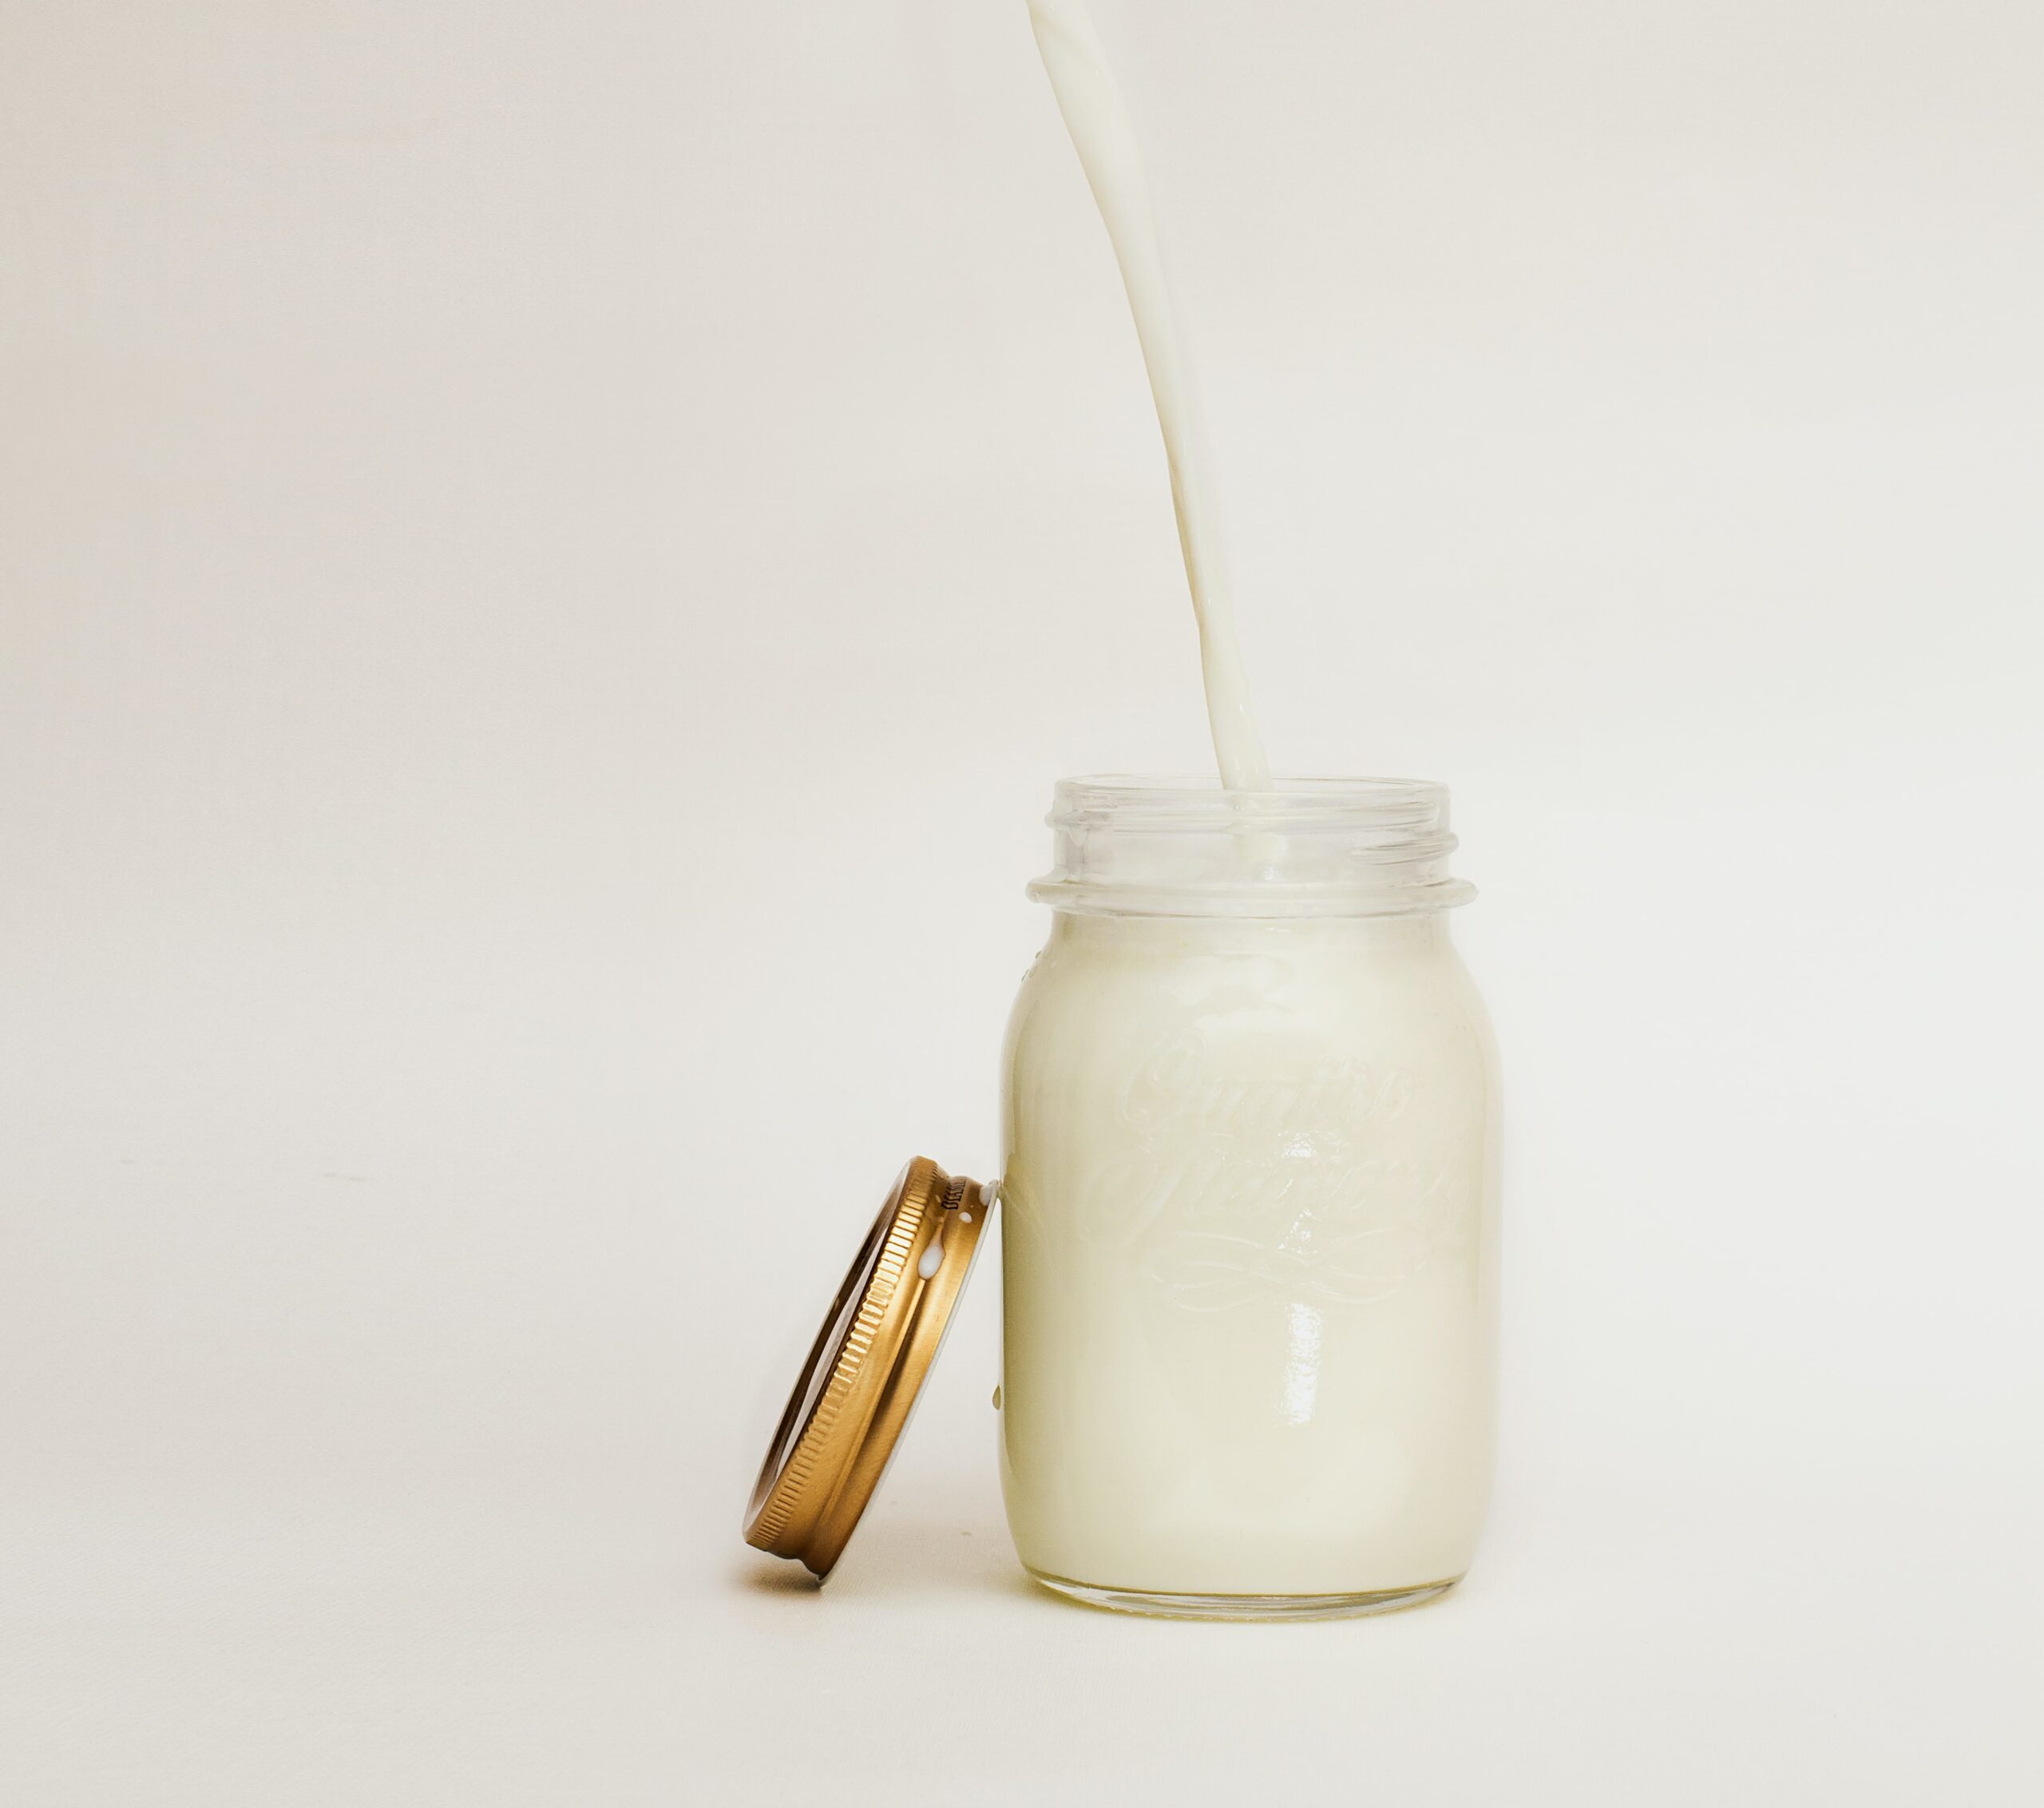 Milk being collected in a jar